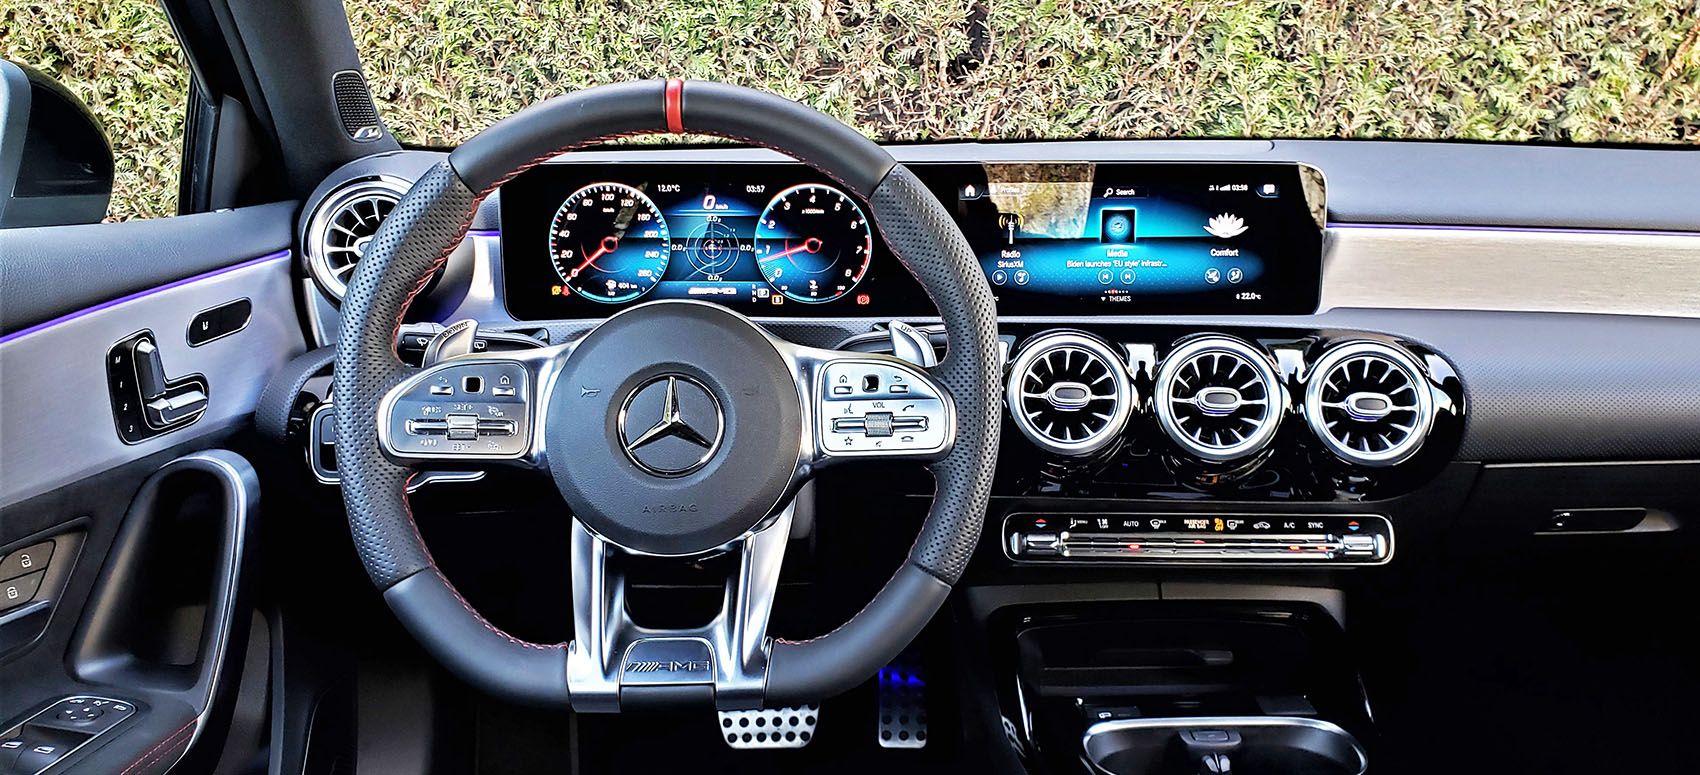 The 2021 Mercedes-AMG A35 4Matic Hatch instrument panel.